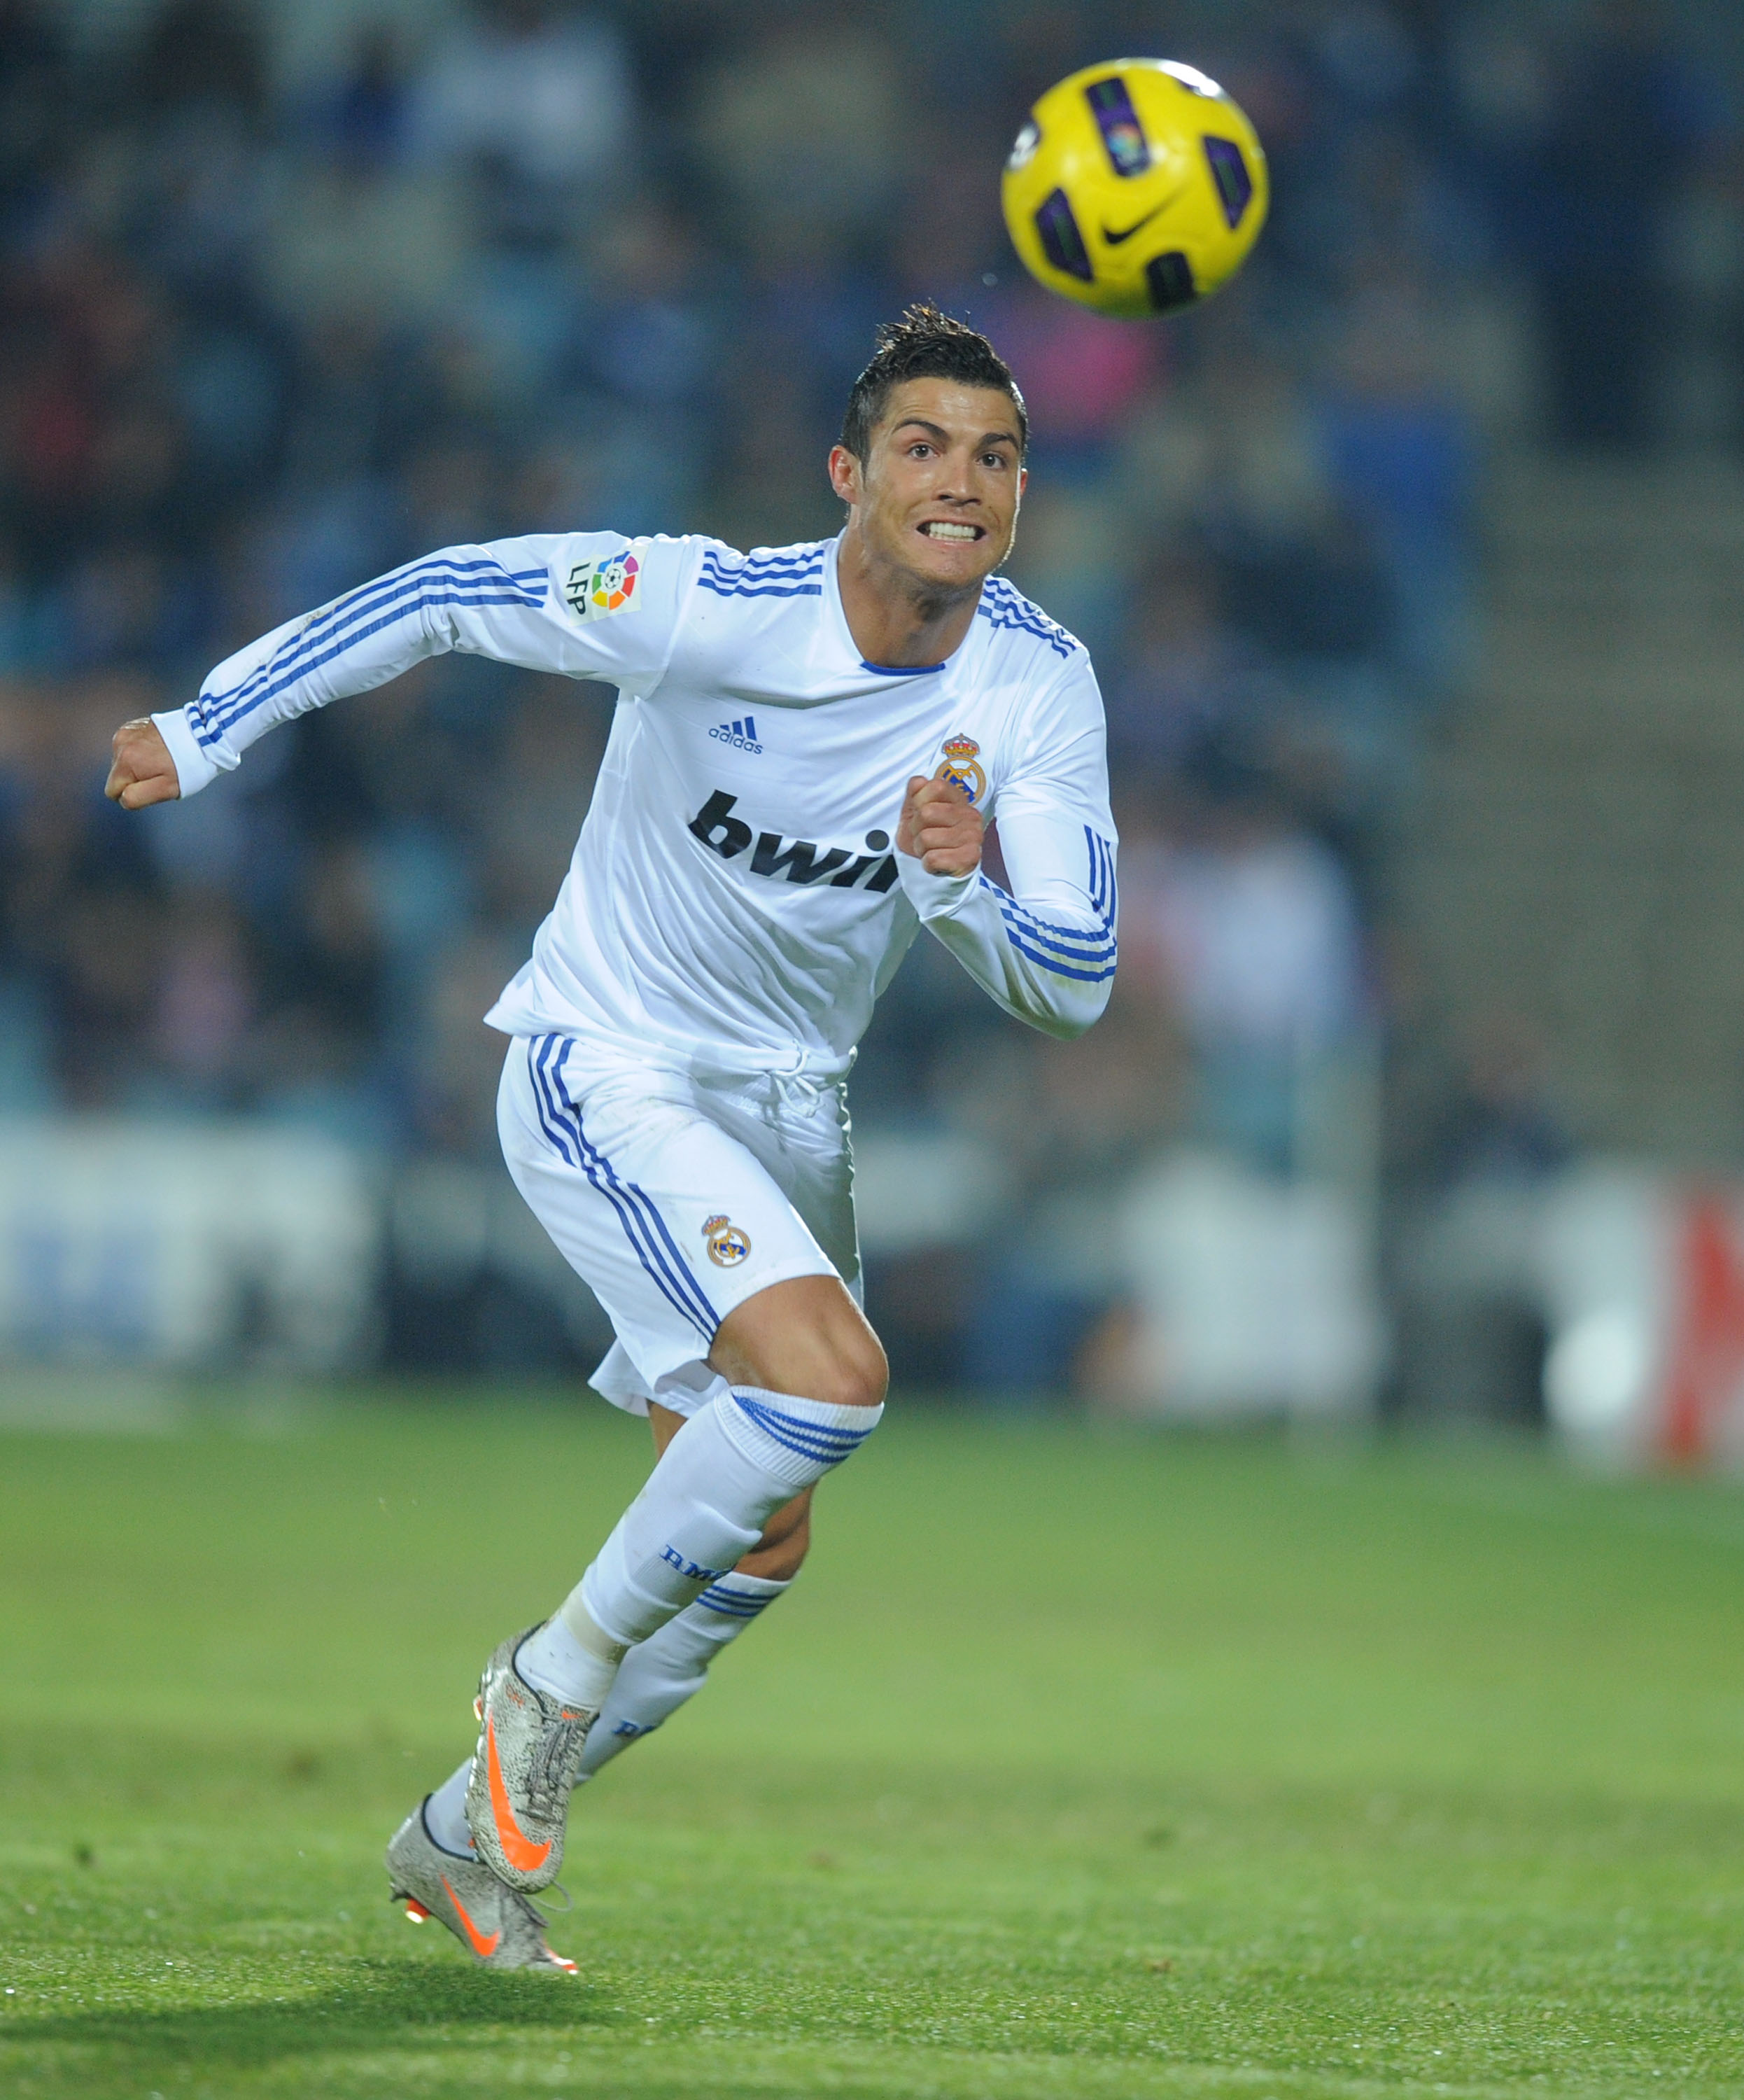 GETAFE, SPAIN - JANUARY 03:  Cristiano Ronaldo of Real Madrid chases a long ball during the La Liga match between Getafe and Real Madrid at Coliseum Alfonso Perez stadium on January 3, 2011 in Getafe, Spain.  (Photo by Denis Doyle/Getty Images)